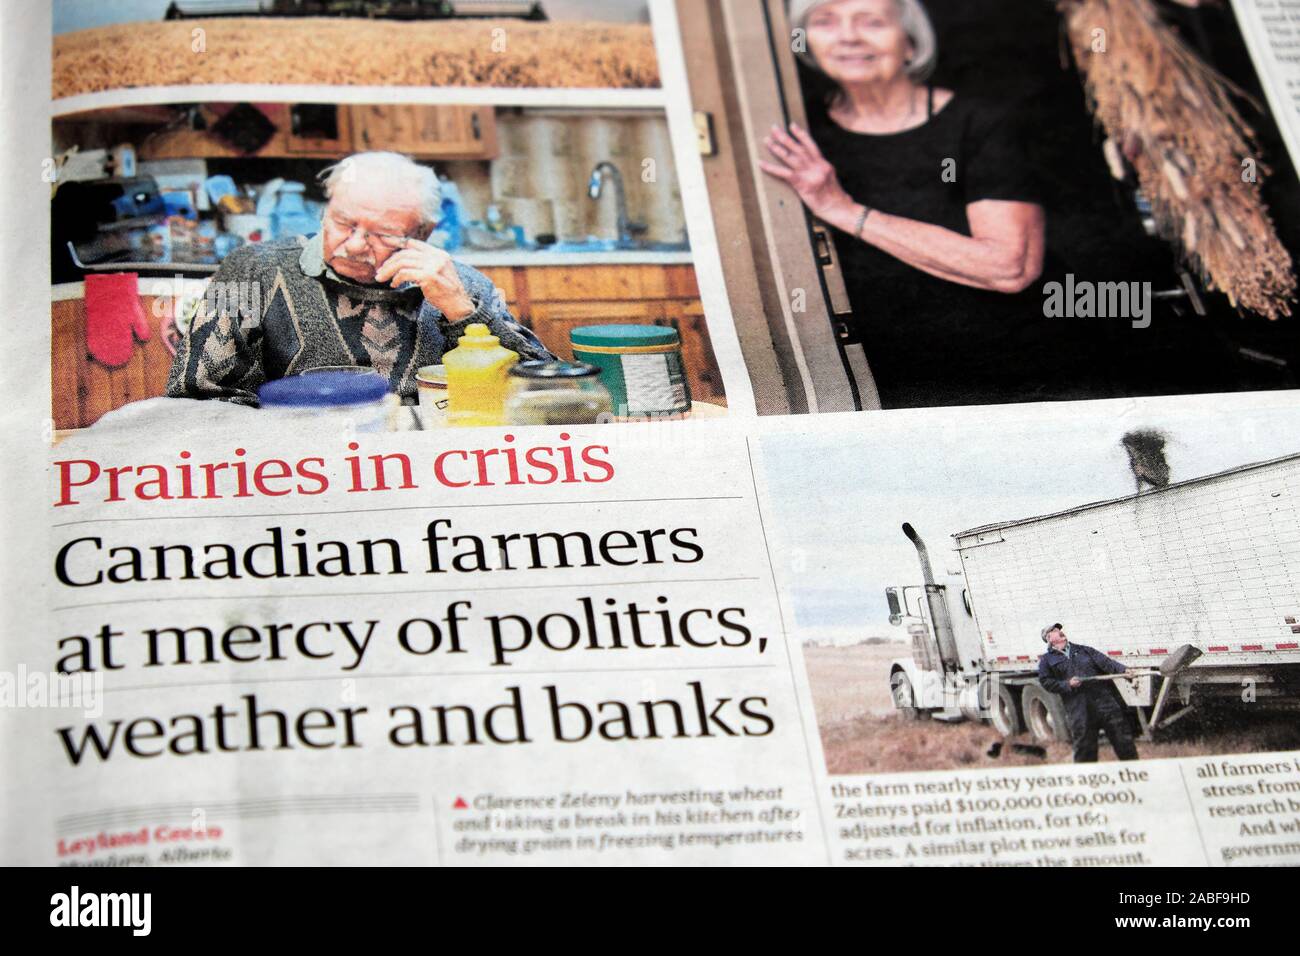 'Canadian farmers at mercy of politics weather and banks' Praries in crisis inside newspaper article in the Guardian  18 November 2019 London UK Stock Photo